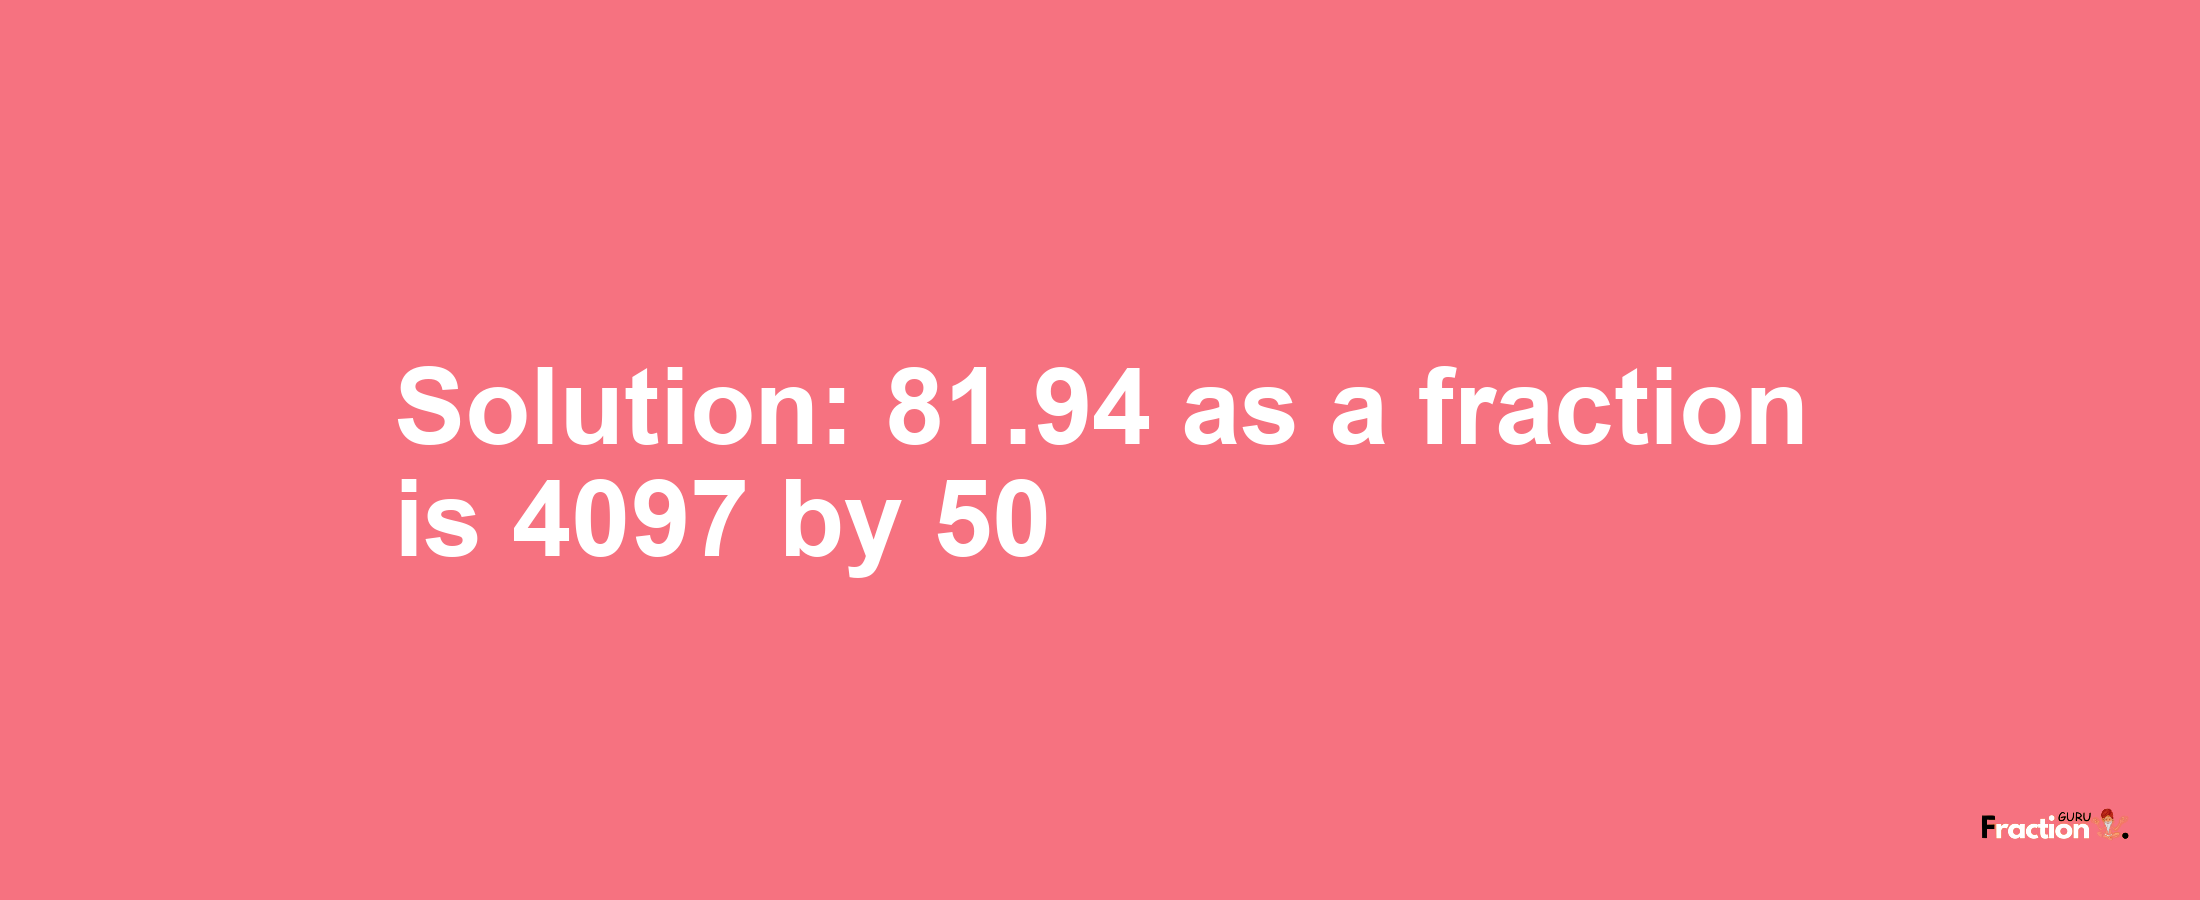 Solution:81.94 as a fraction is 4097/50